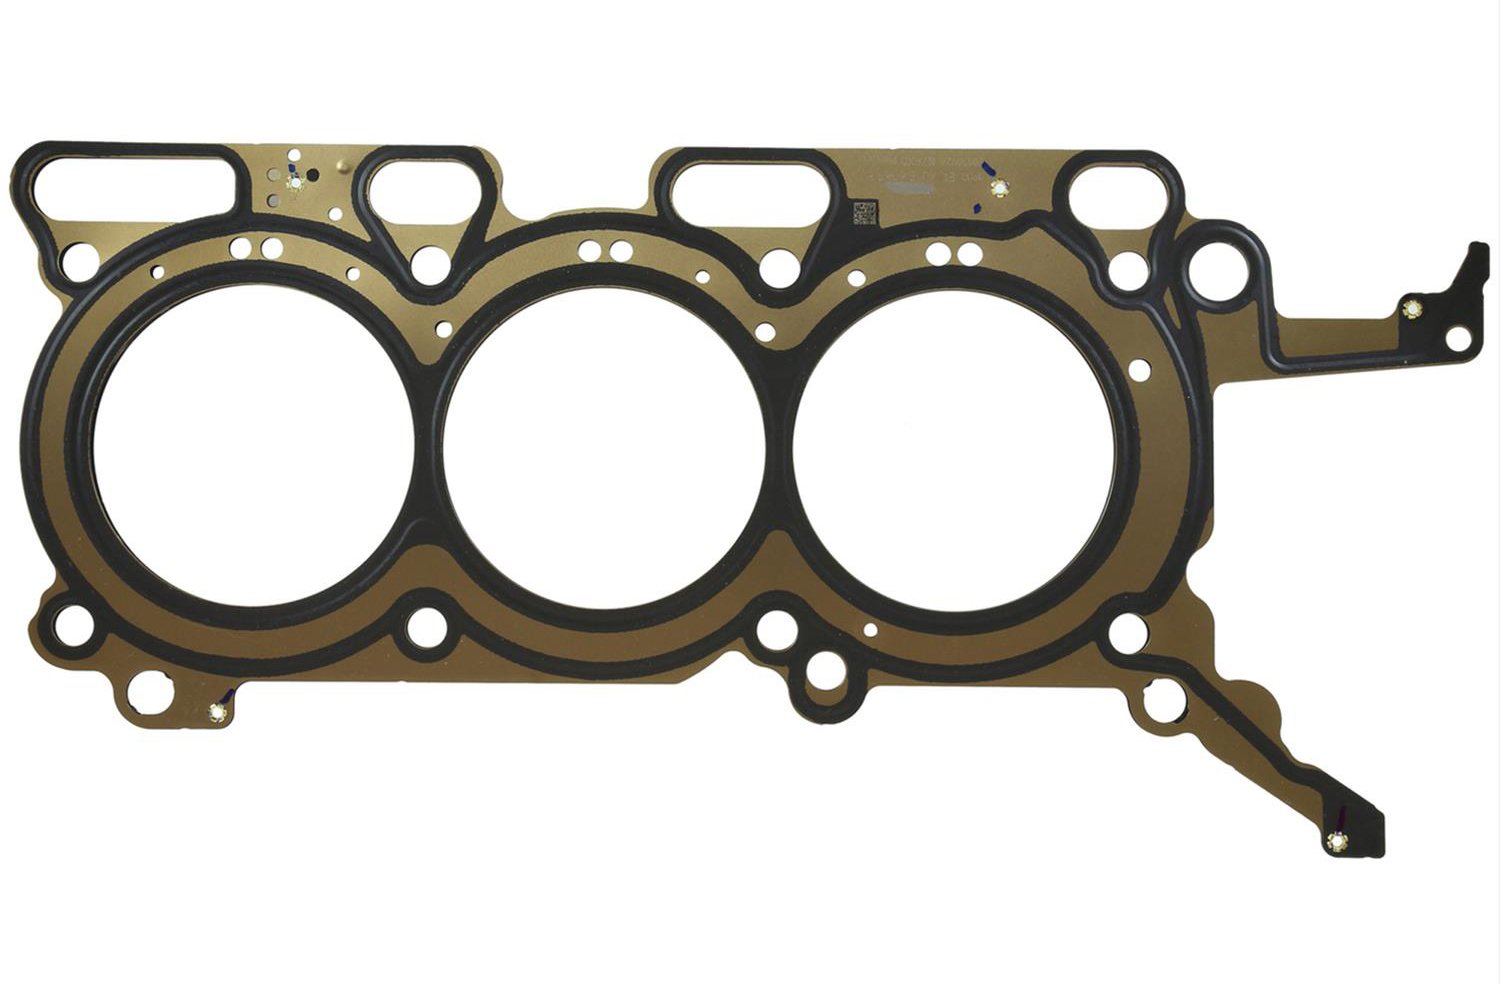 PermaTorque MLS Head Gasket for Select Ford, Lincoln, Mazda, Mobility Ventures with 3.7L Engine